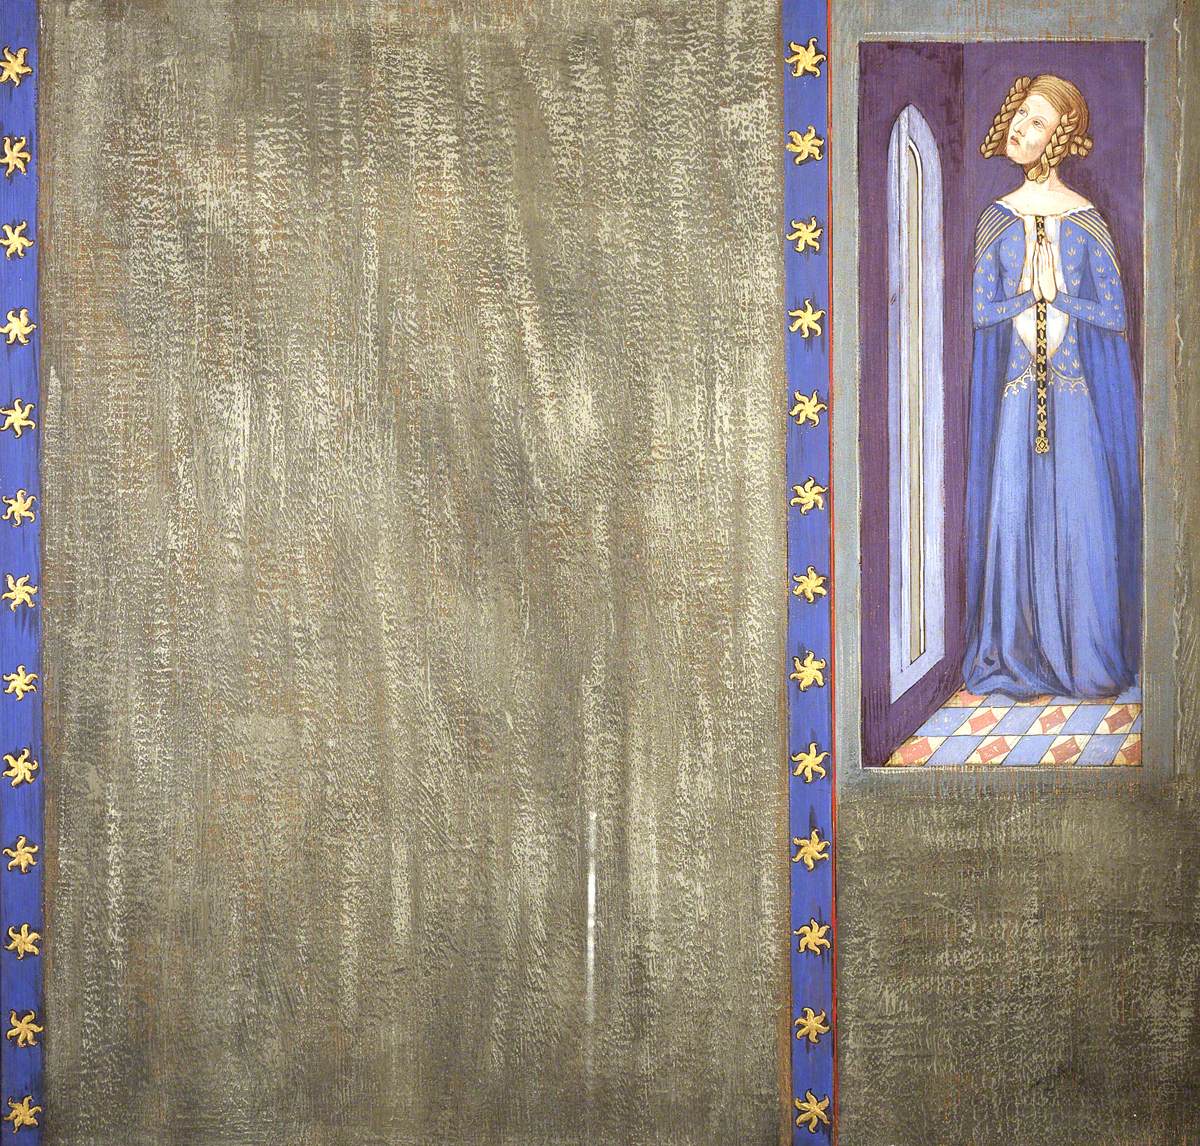 Reconstruction of Medieval Mural Painting, Possibly Queen Philippa or Daughter